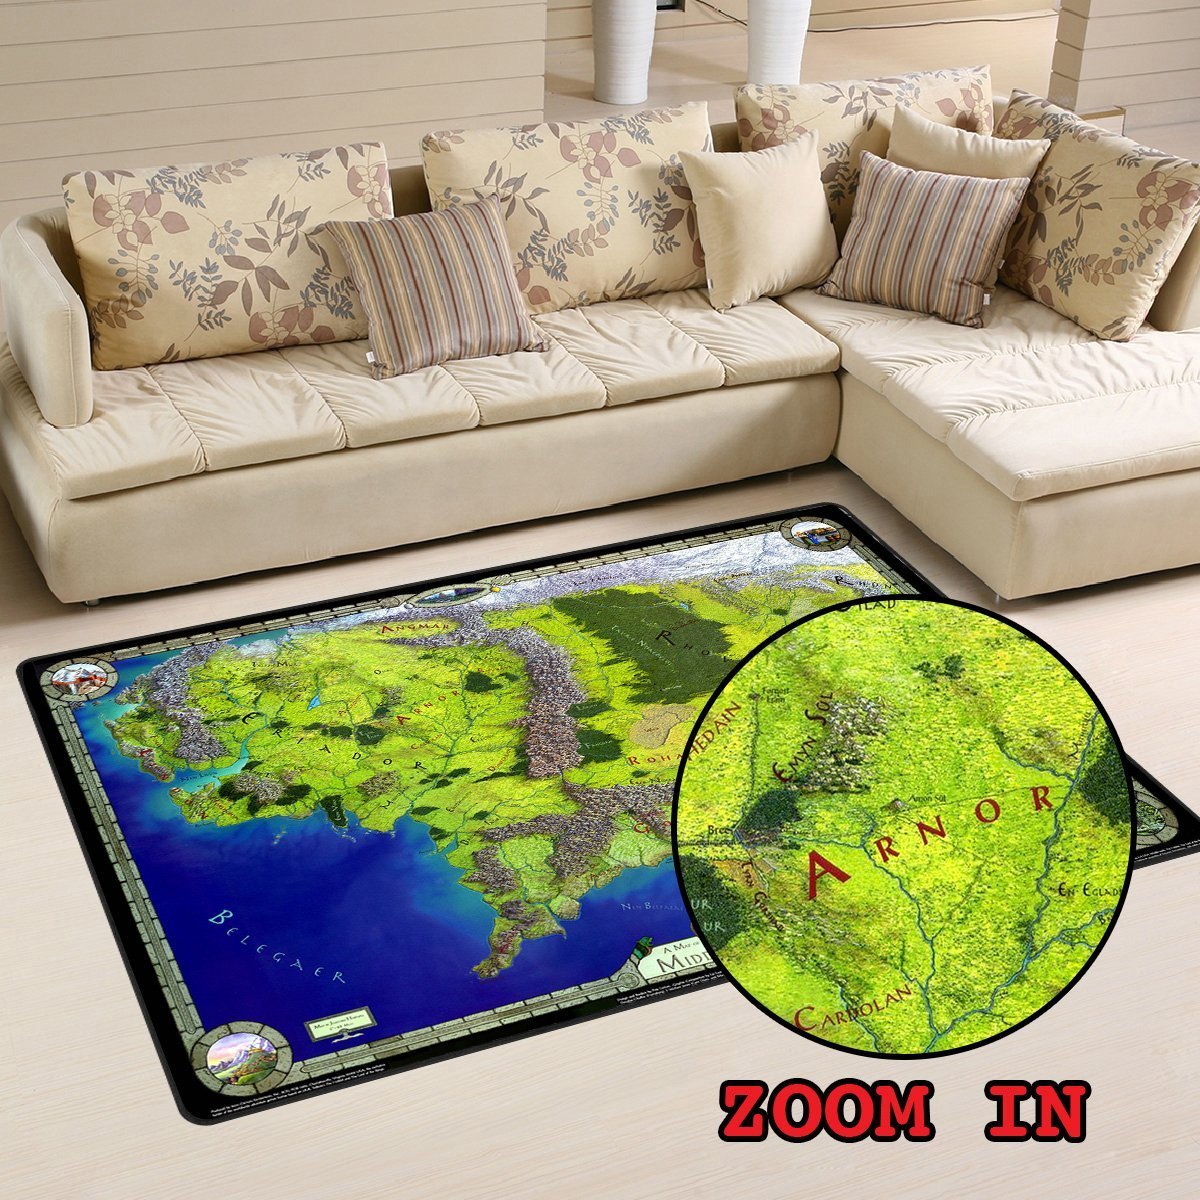 Area Rug Middle Earth Full Map Lor High Resolution 04743 Home Decor Bedroom Living Room Decor